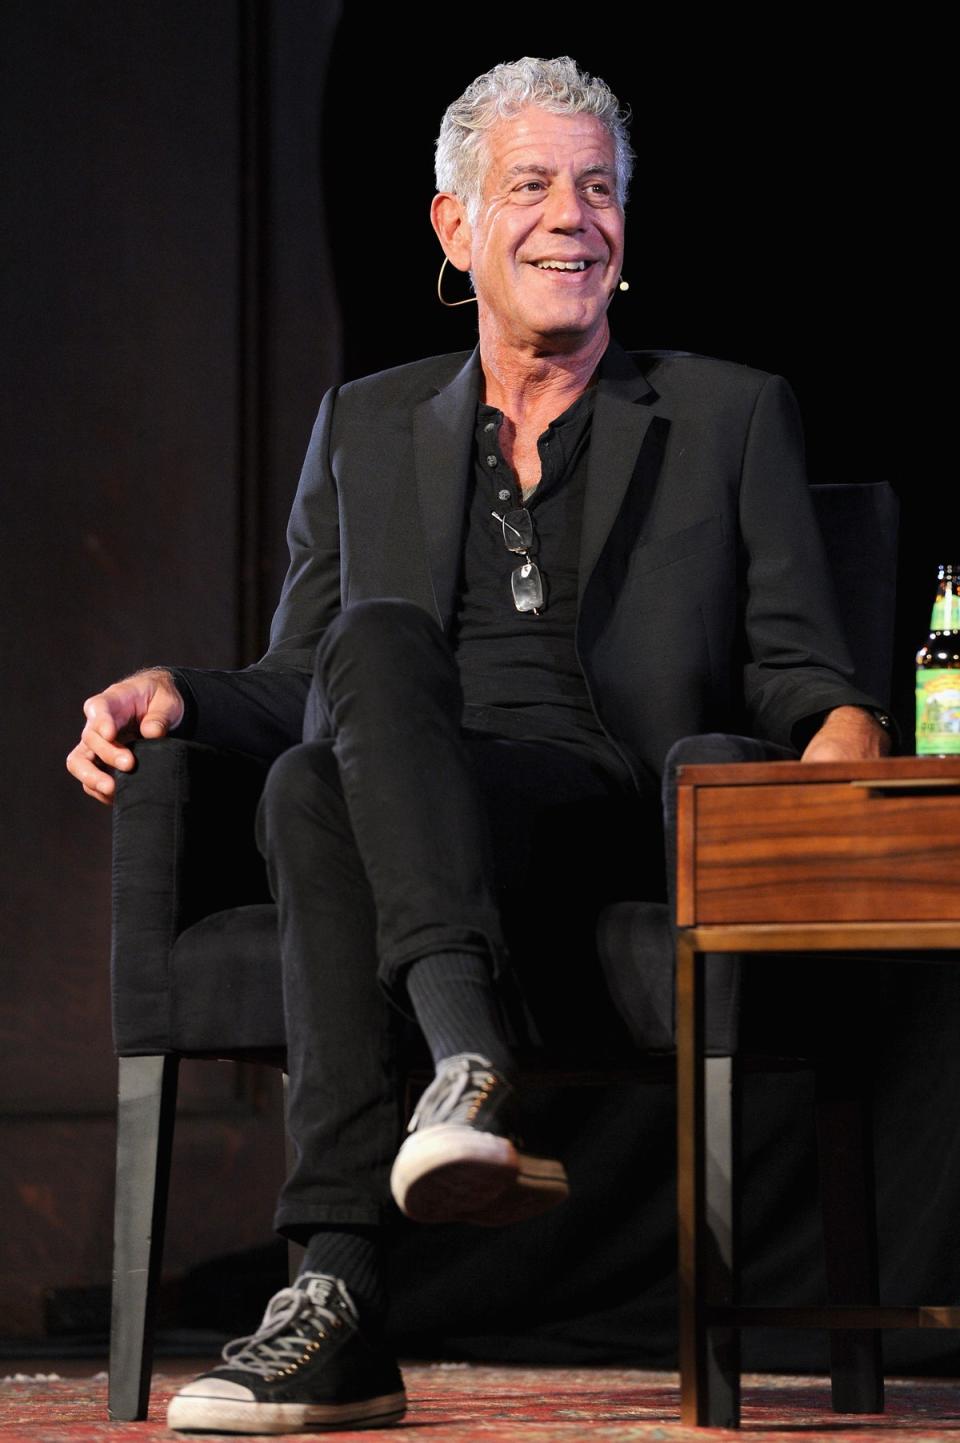 Chef Anthony Bourdain speaks onstage during a panel with Patrick Radden Keefe at the New York Society for Ethical Culture on 7 October 2017 in New York City (Craig Barritt/Getty Images for The New Yorker)